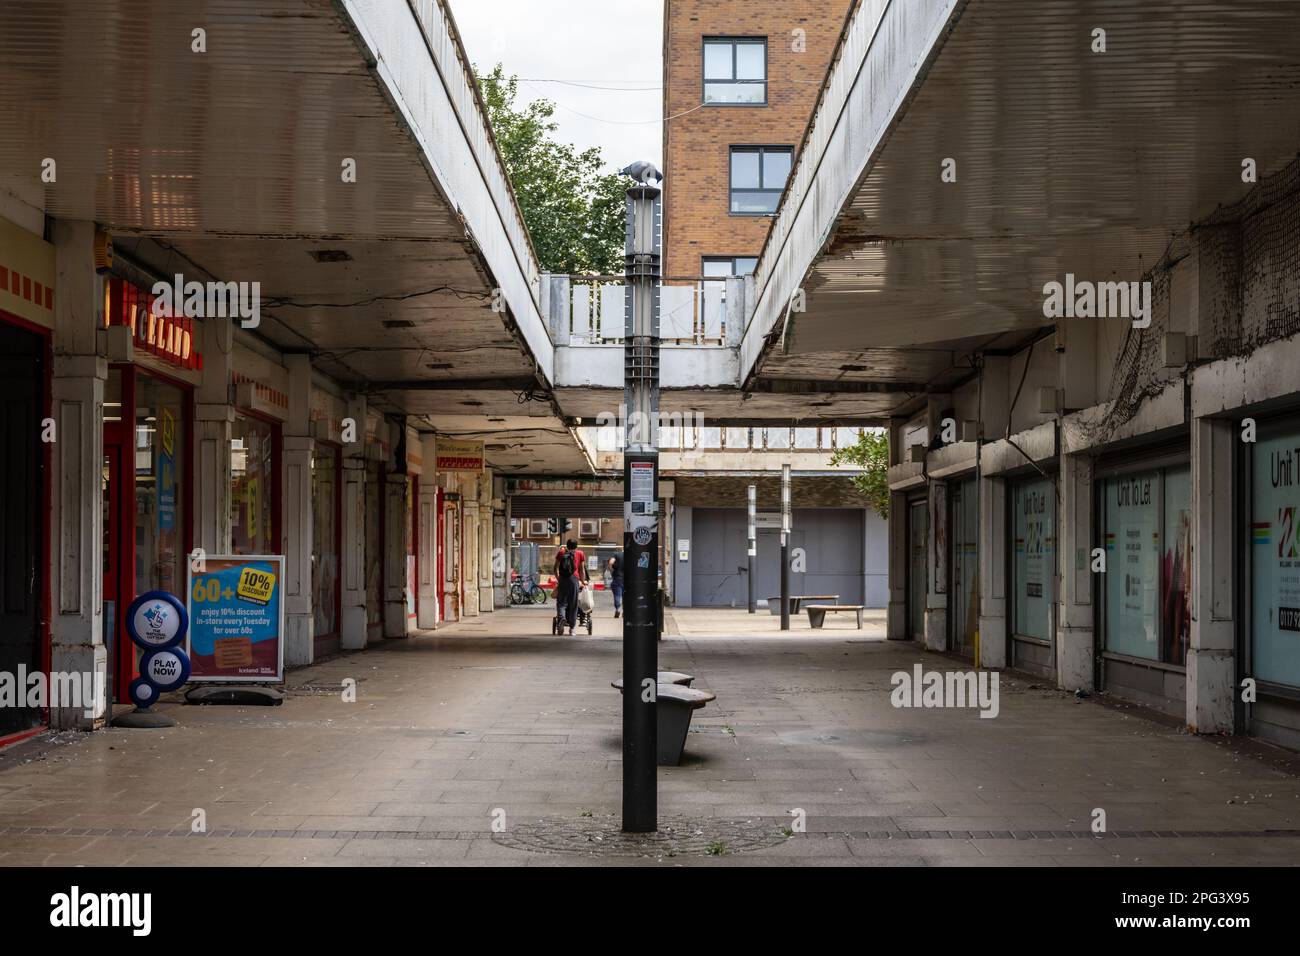 A discount supermarket holds on as one of the last shops in the decaying St Catherine's Place shopping precinct in south Bristol. Stock Photo